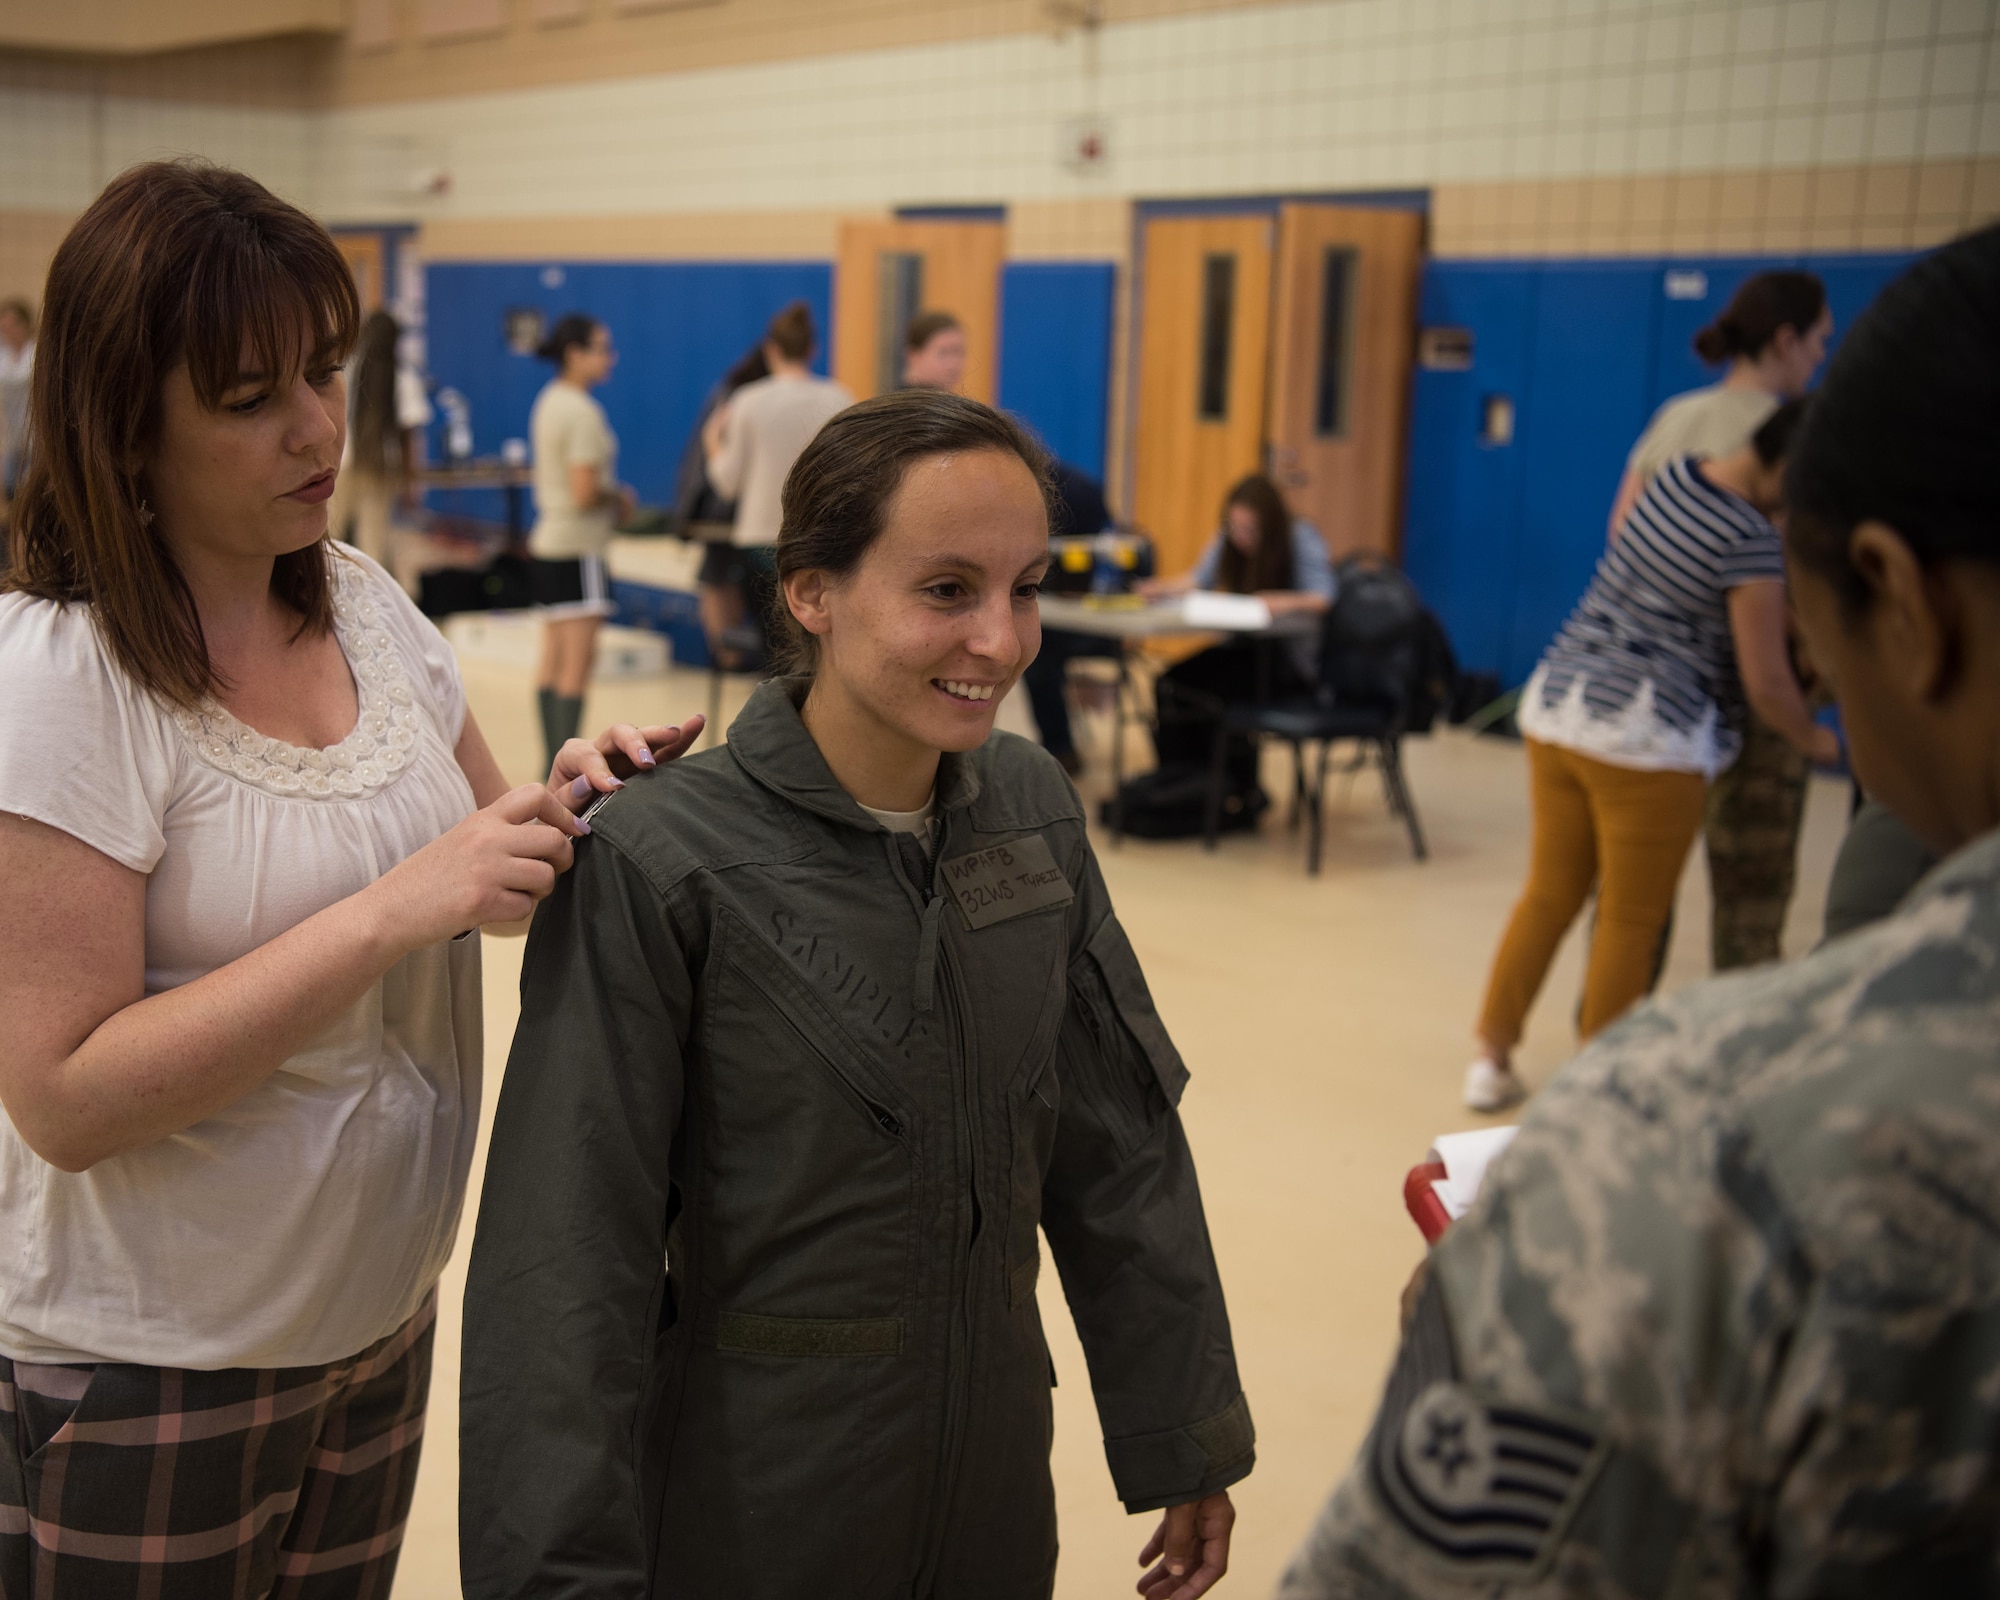 A female aviator gets measurements while in a flight suit during a Female Fitment Event at Joint Base Langley-Eustis, Virginia, June 4, 2019. Traditionally, many flight suits female aviators had to wear were made to the measurements and specifications of their male counterparts. (U.S. Air Force photo by Airman 1st Class Marcus M. Bullock)